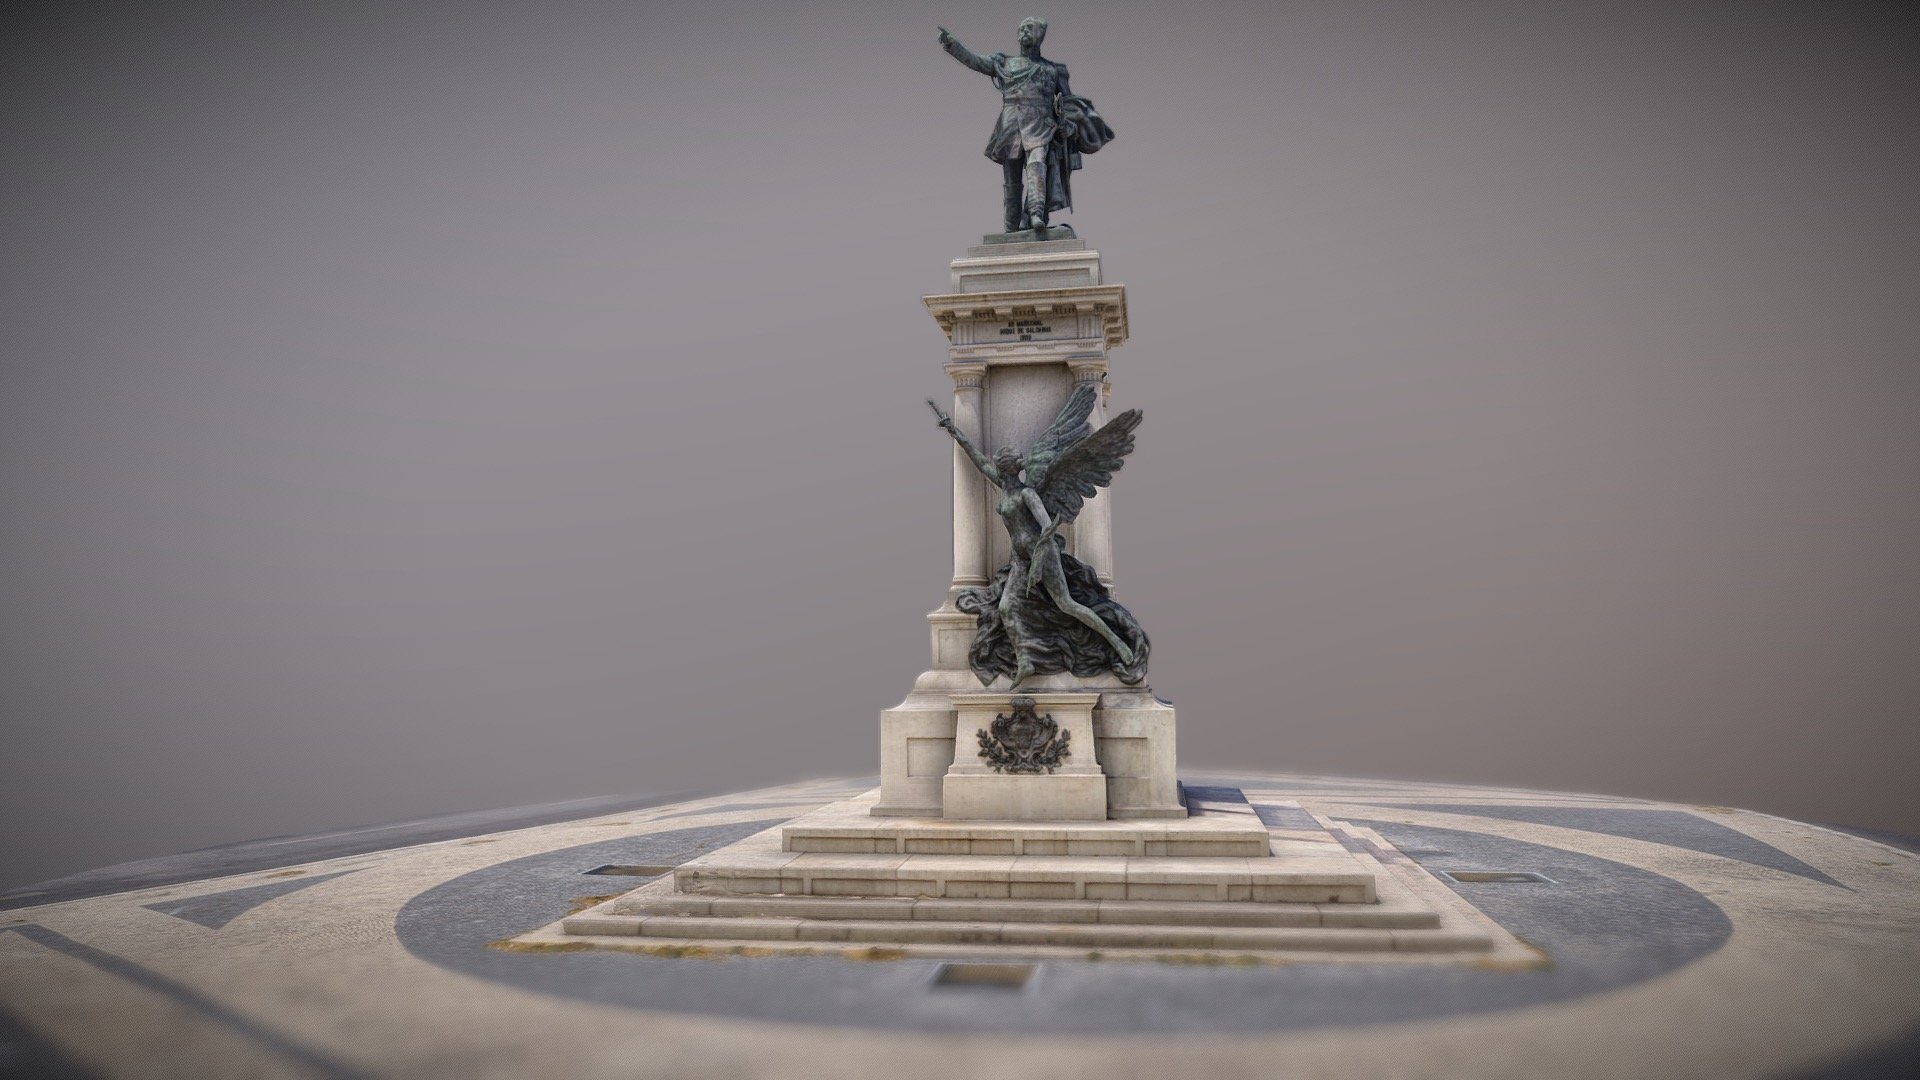 This is a low-res version of the photogrammetry based #3D model of the Marshal Saldanha.
President of the Council of Ministers of the Kingdom of Portugal and the Algarves

Marshal Saldanha , was an officer of the Portuguese Army , in which he reached the post of marshal ,
He was born in a noble family, where Marquis of Pombal  has been a glorious grandfather of Saldanha.
Meanwhile, he joined Freemasonry and from 1828 to 1837 he was the 1st Grand Master of the East Saldanha or Southern Freemasonry.
The monument  designed by Mr. Ventura Terra. It was completed on June 3, 1905; it has a height of 7.82m which, next to the statue of 3.18m, gives a total of 11m.
* This is a model from our bonus-pack for our #photogrammetry tutorials and workshop https://youtu.be/tZfPptw0OaM - Monument of the Marshal Saldanha - 3D model by drone360pilot 3d model